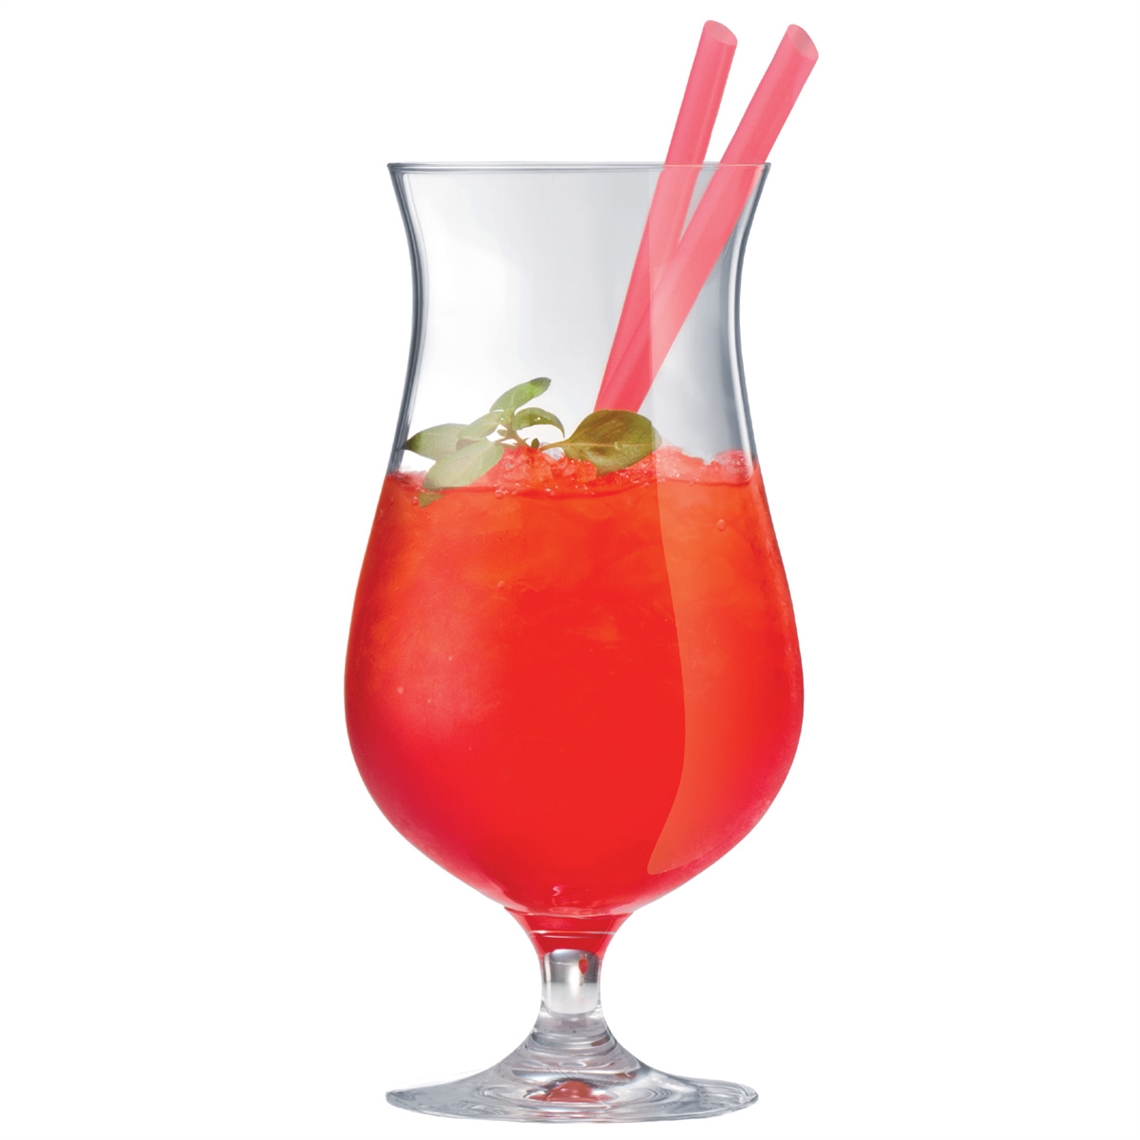 View more cocktail glasses from our Cocktail Glasses range